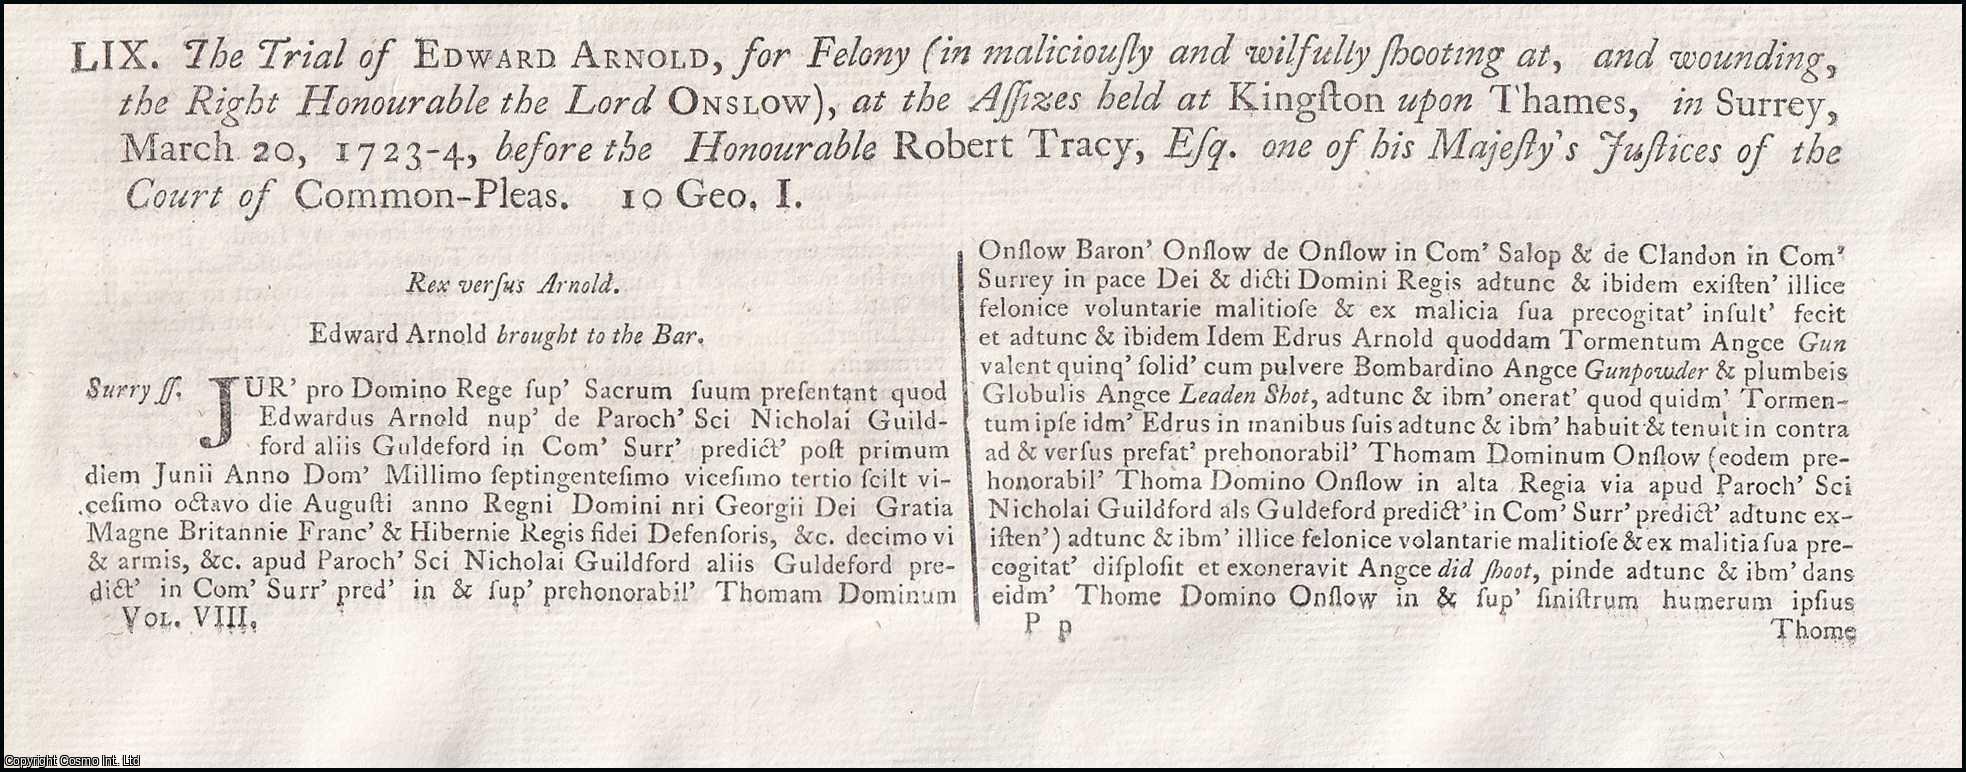 [Trial]. - The Trial of Edward Arnold, for Felony (in maliciously and wilfully shooting at, and wounding, the Right Honourable the Lord Onslow), at the Assizes held at Kingston upon Thames, in Surrey, March 20, 1723-4, before the Honourable Robert Tracy, Esq. One of his Majesty's Justices of the Court of Common-Pleas. An original report from the Collected State Trials.